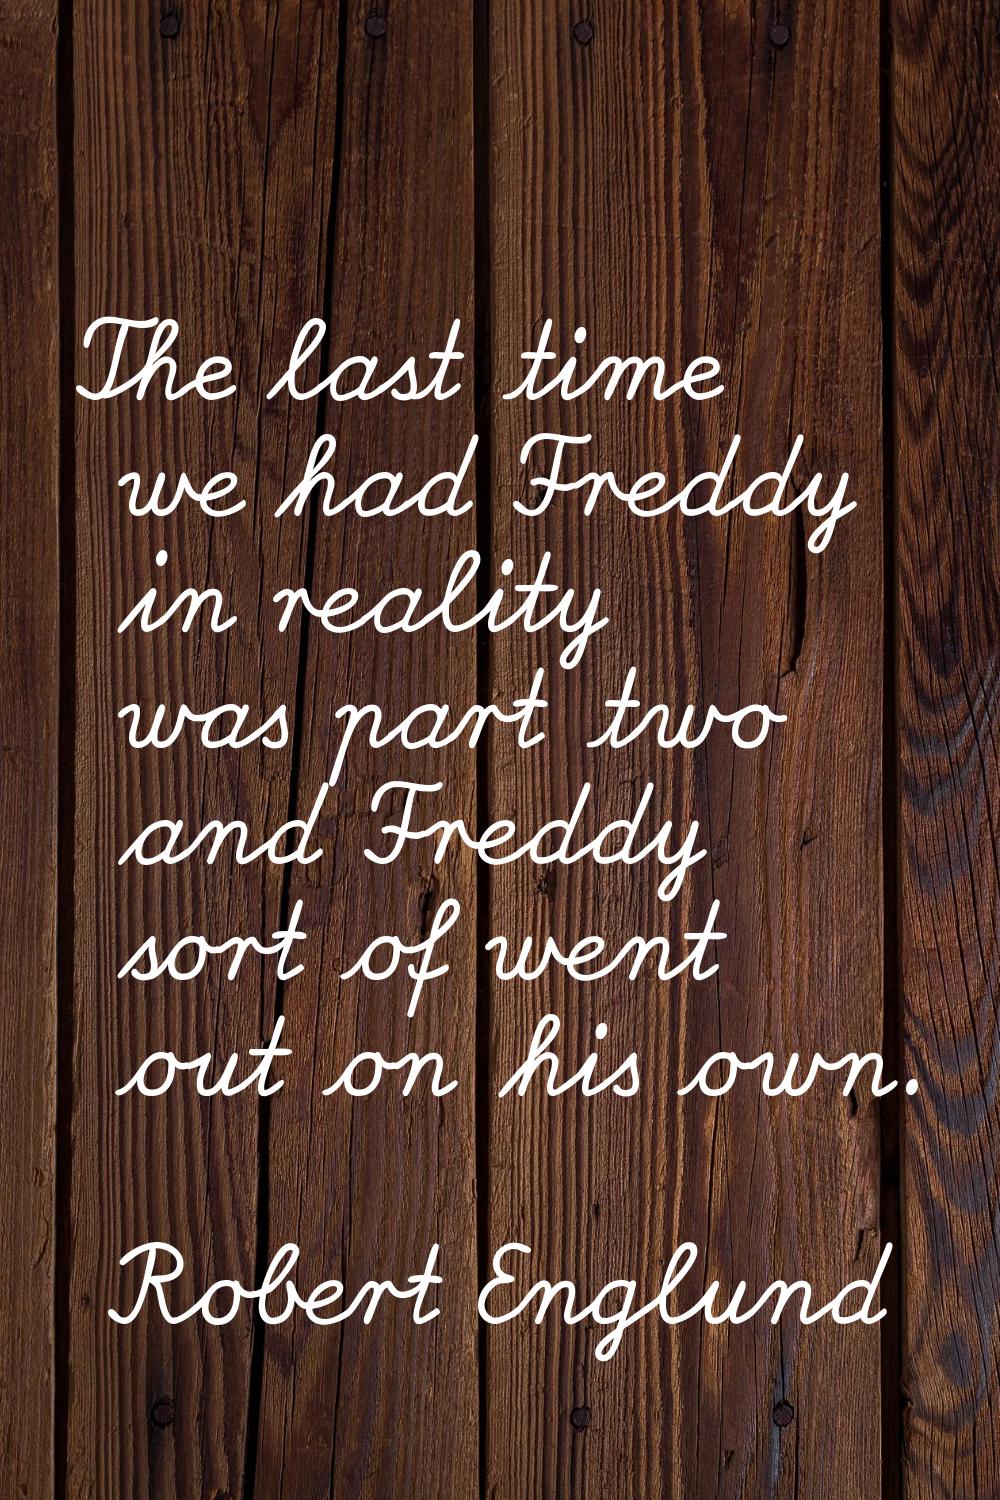 The last time we had Freddy in reality was part two and Freddy sort of went out on his own.